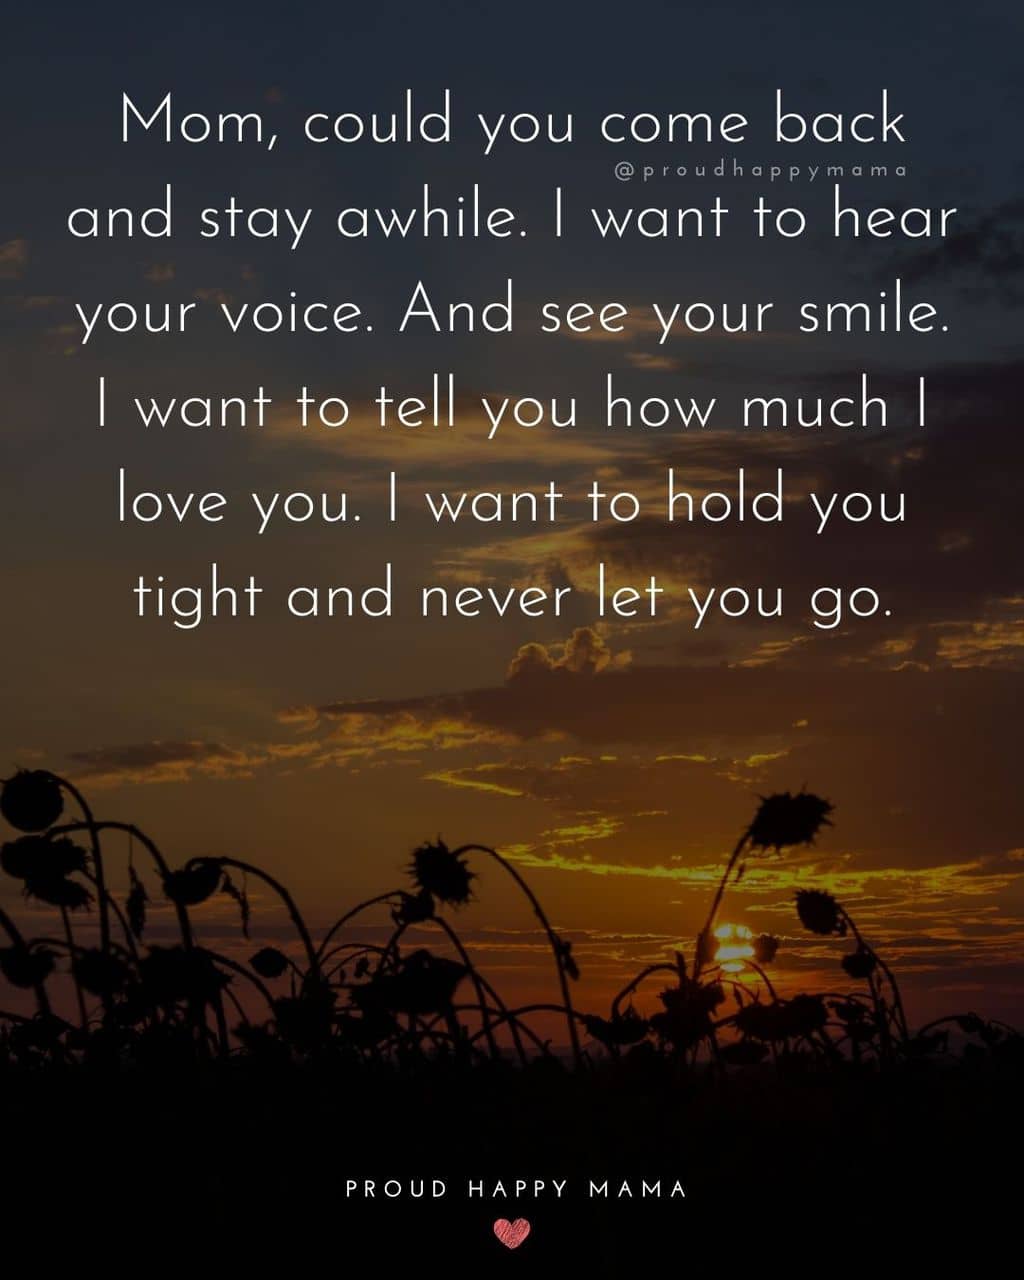 Sunflowers with sun setting in background with text overlay,‘Mom, could you come back and stay awhile. I want to hear your voice. And see your smile. I want to tell you how much I love you. I want to hold you tight and never let you go.’